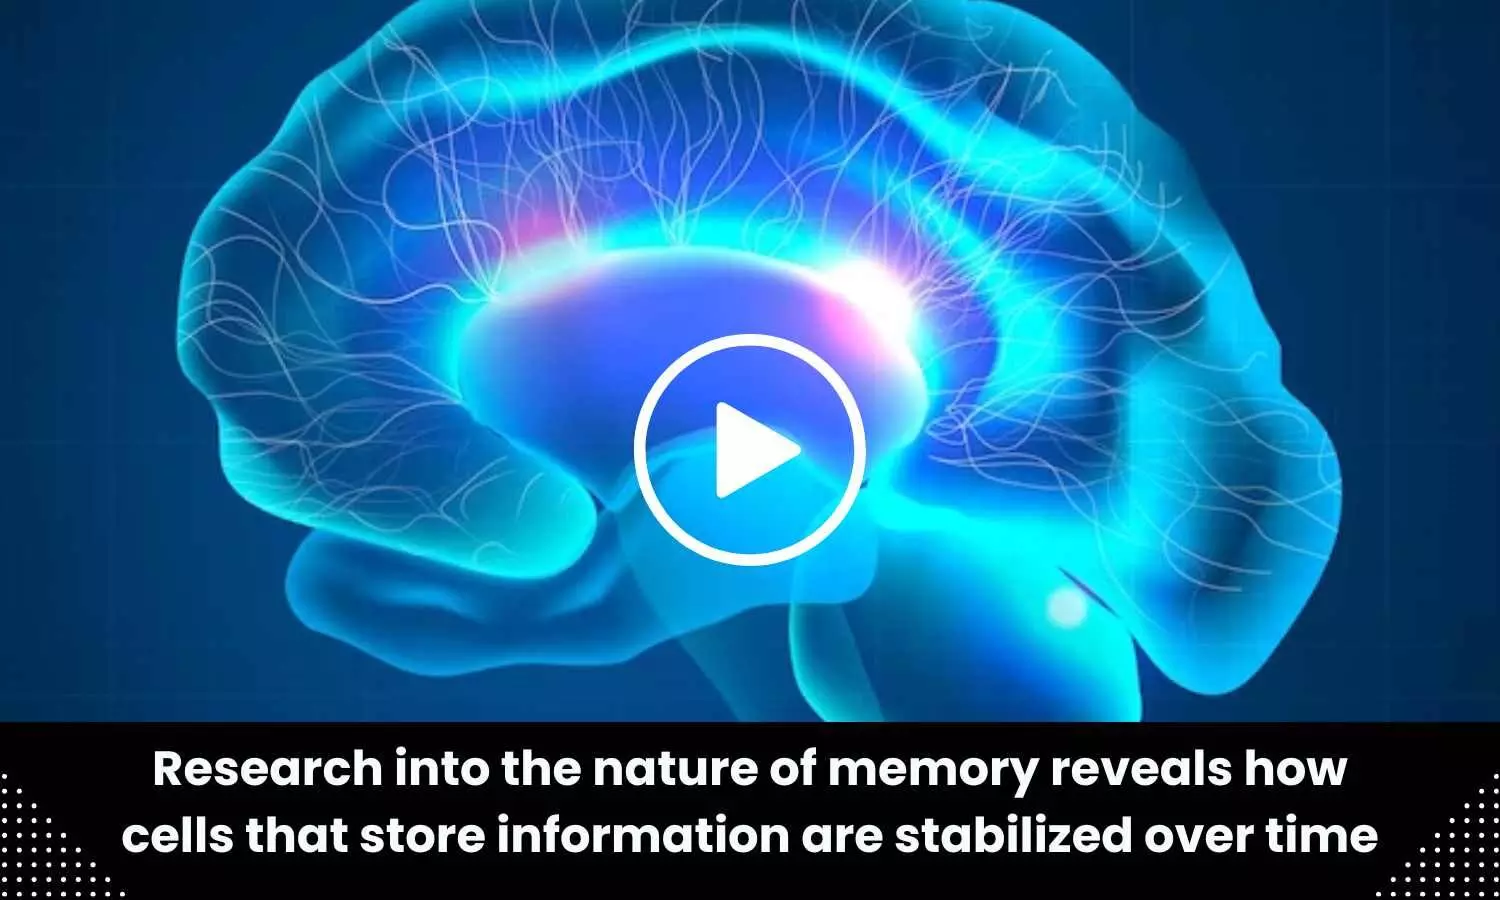 Research into the nature of memory reveals how cells that store information are stabilized over time